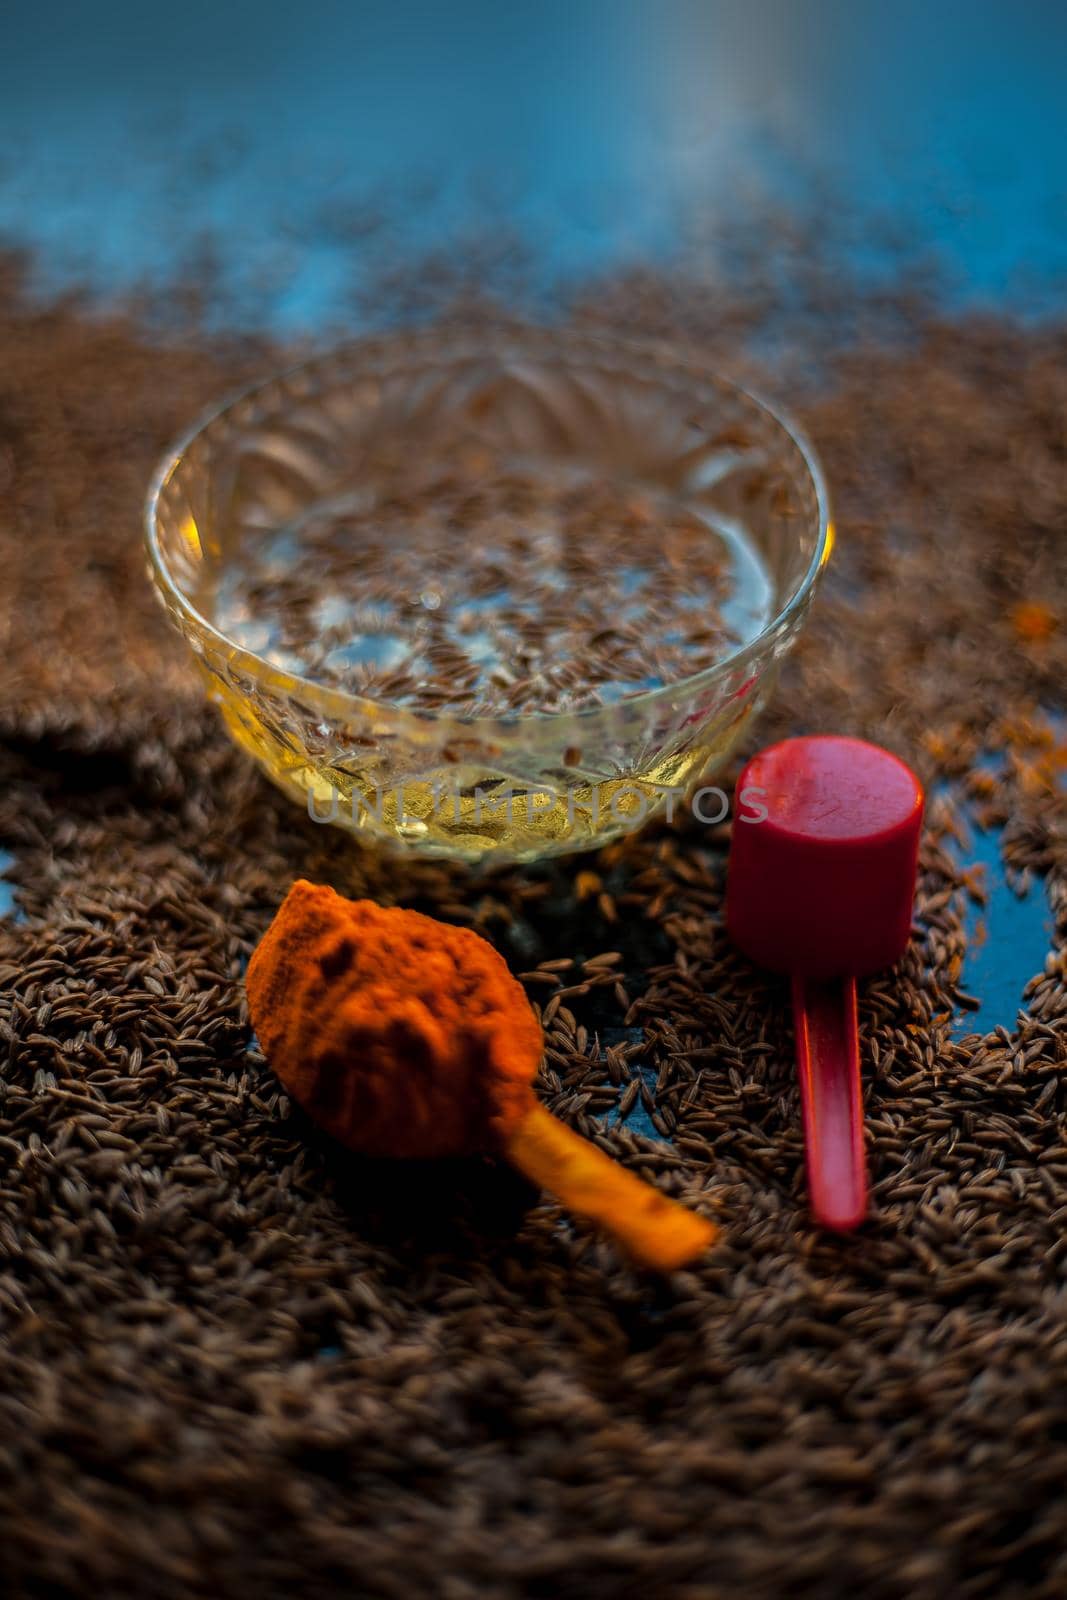 DIY Face mask for smooth and glowing skin. Shot of cumin seeds along with some turmeric on a brown surface making a glowing skin face mask all together. by mirzamlk